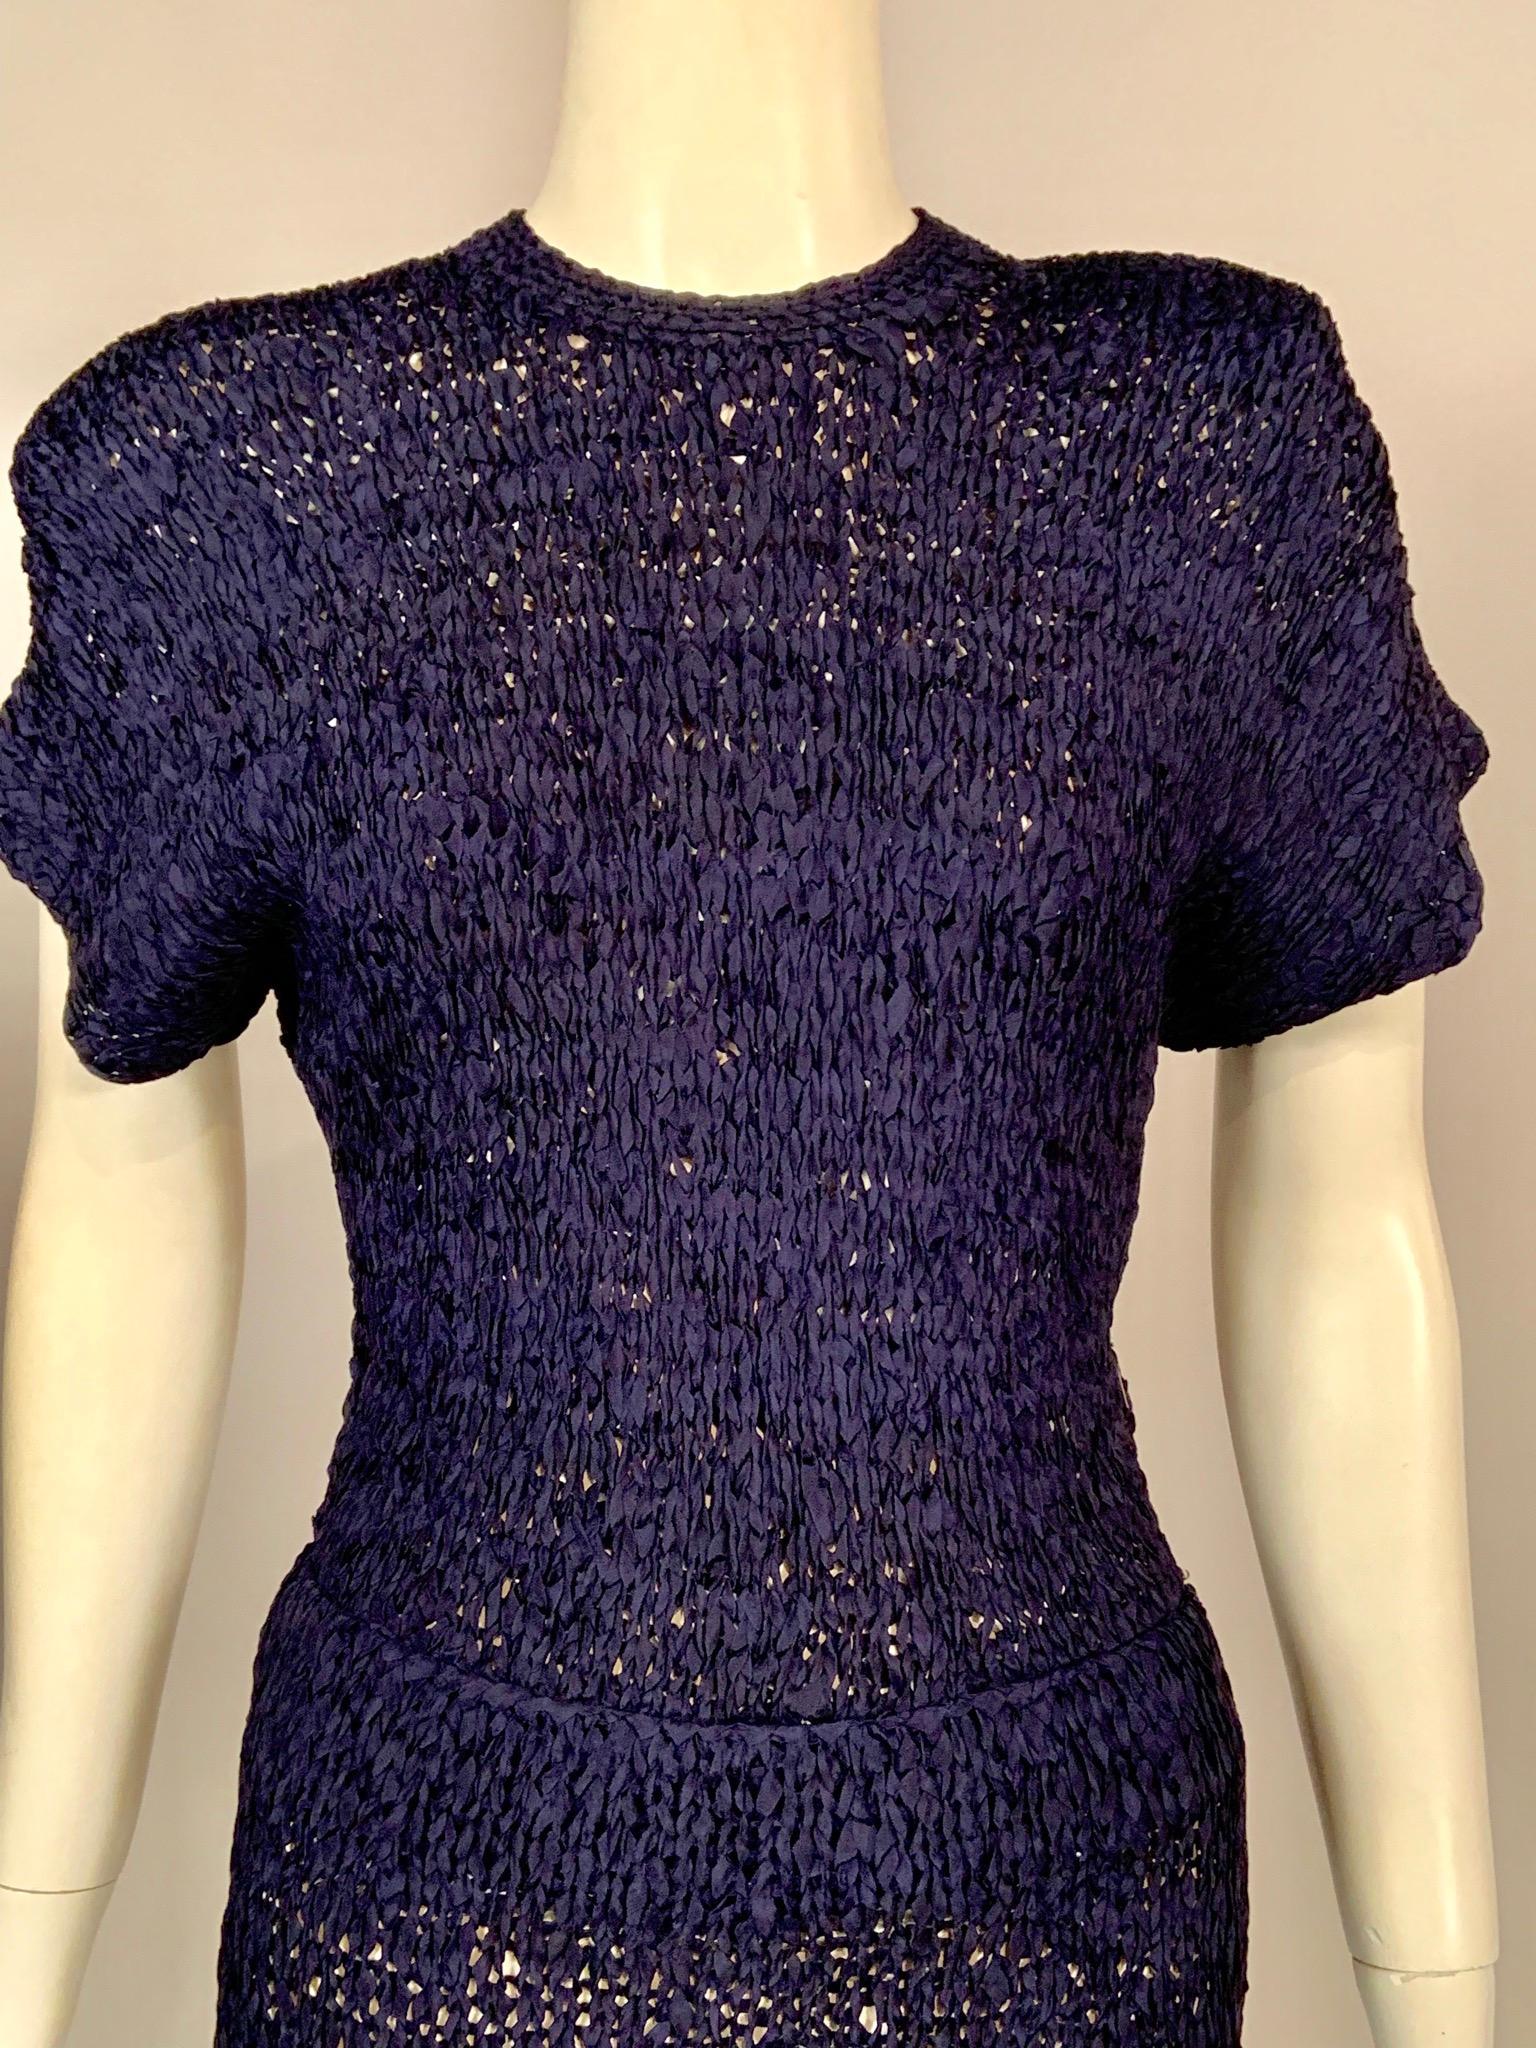 This hand made navy blue silk ribbon dress is in absolutely perfect condition. The dress has a
sexy figure hugging fit which is very flattering.
It has a round neckline, cap sleeves with small shoulder pads, a short center back zipper as well as a